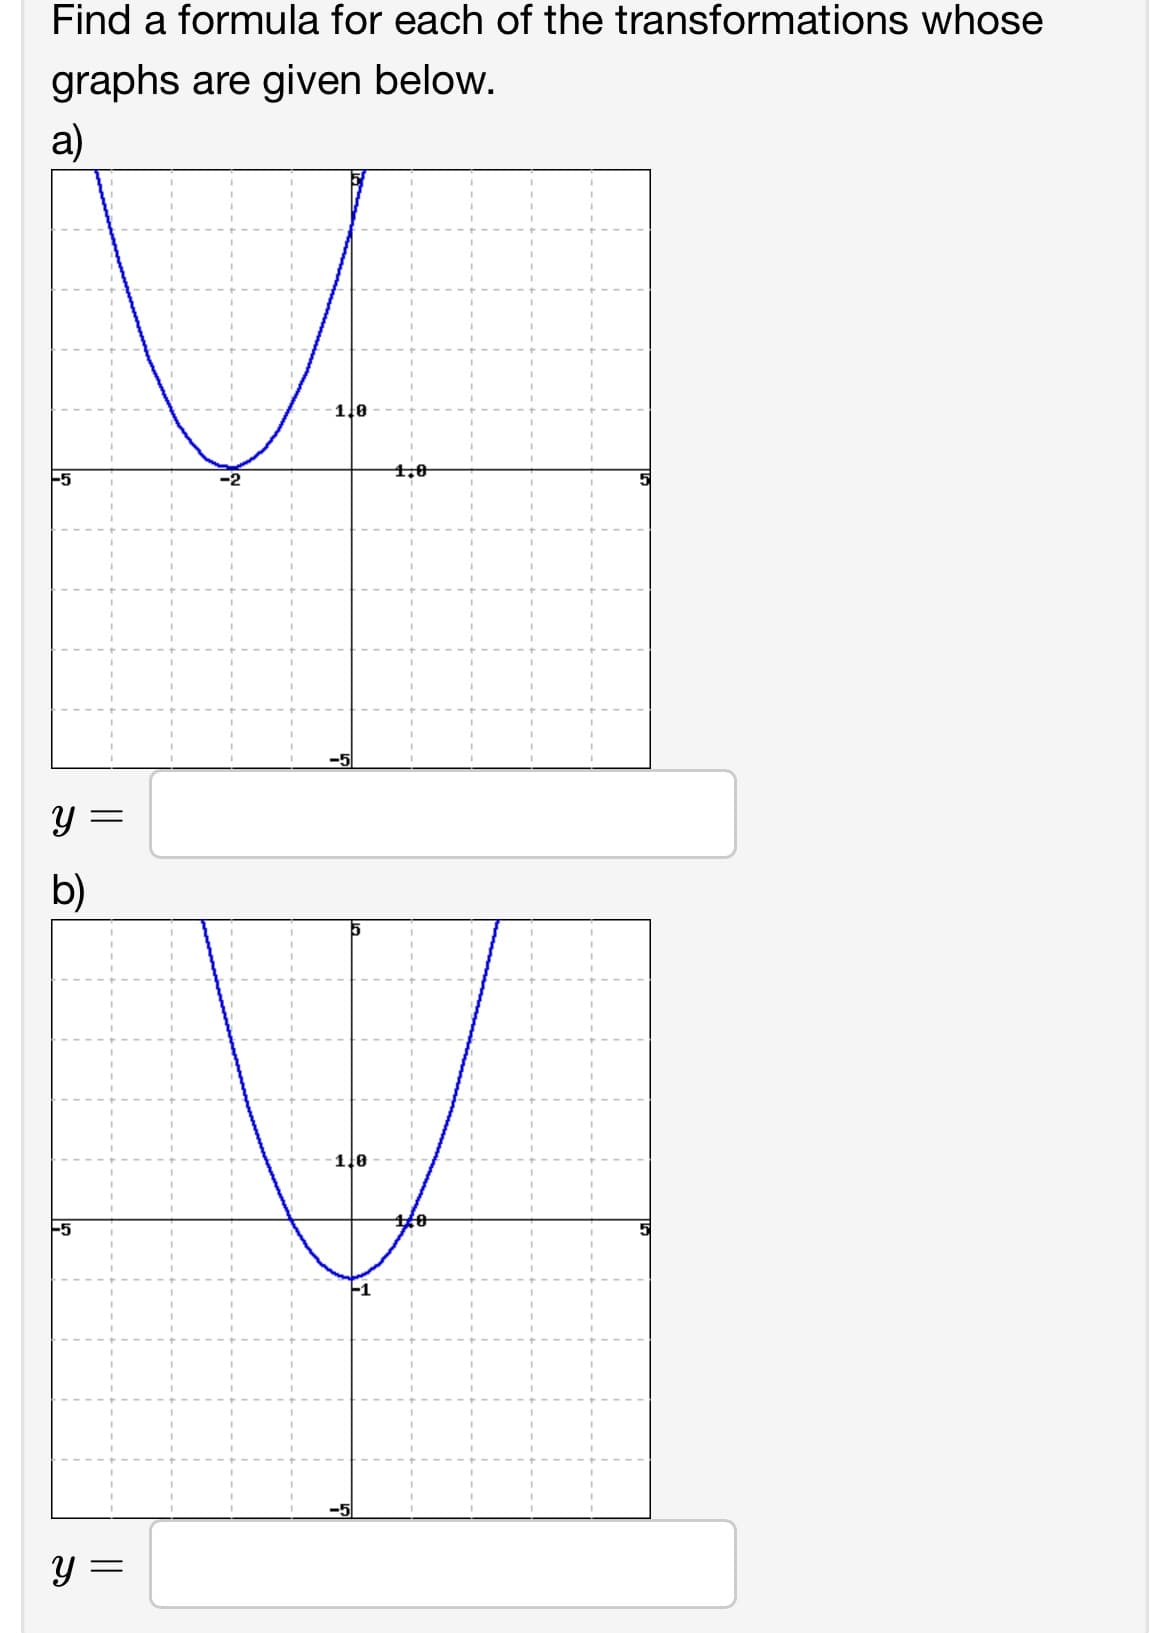 Find a formula for each of the transformations whose
graphs are given below.
a)
-5
Y
b)
||
y =
1/0
Lo